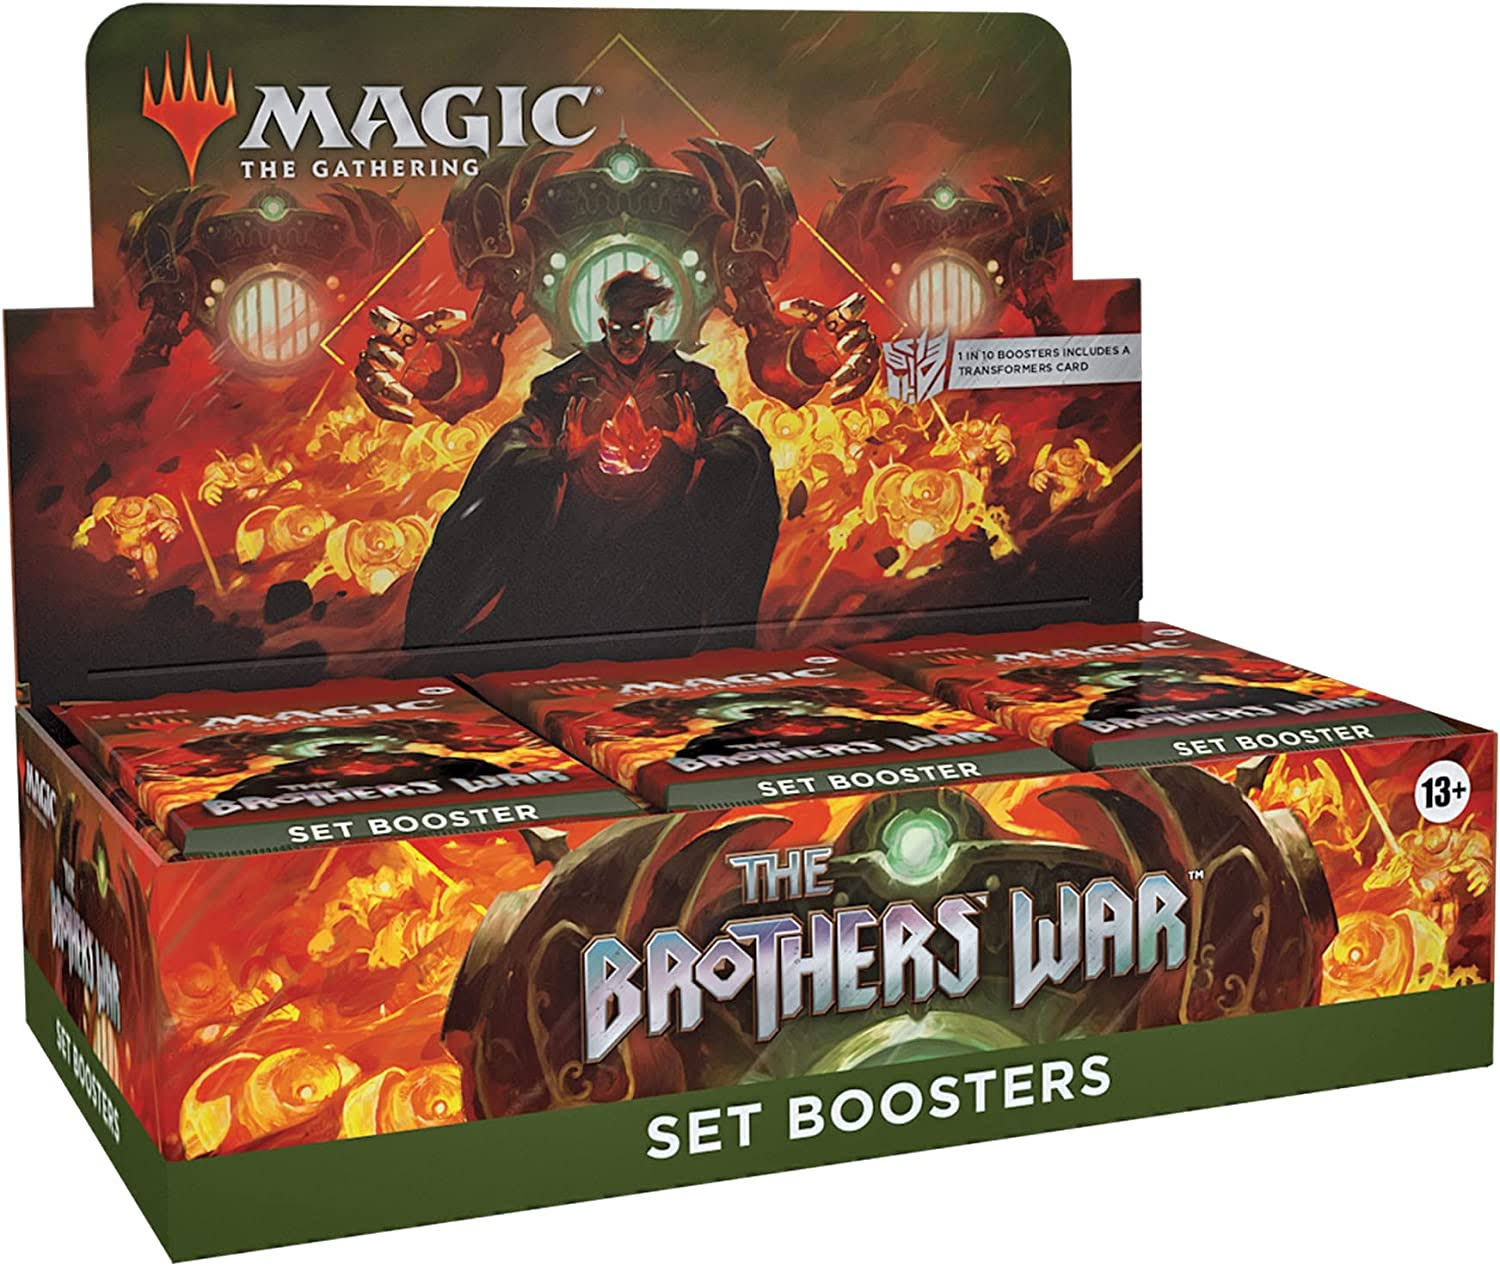 Magic The Gathering - The Brothers War - Set Booster Box